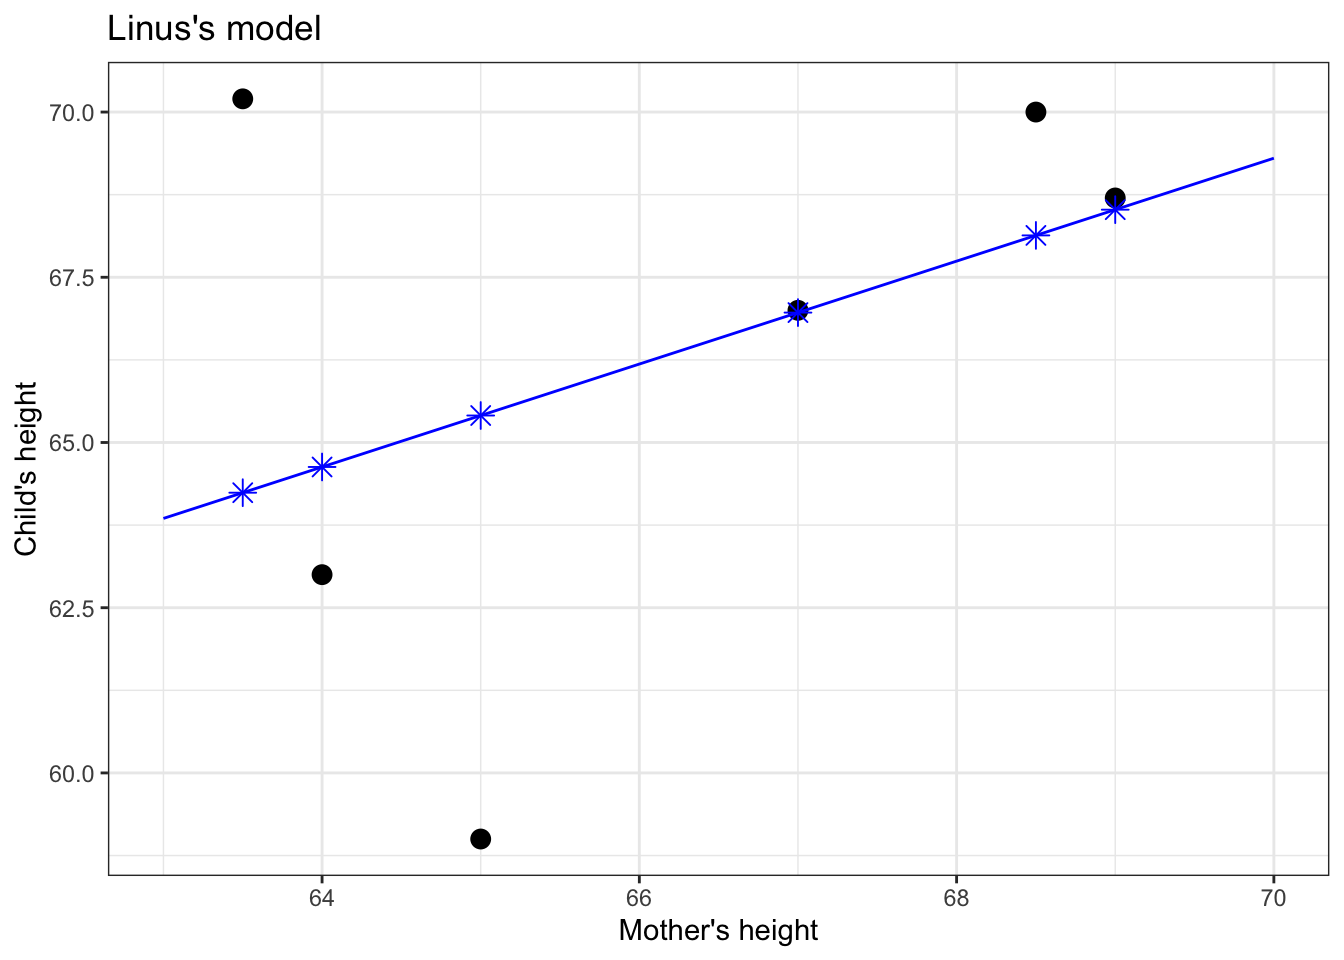 Figure 5.2: Applying the model function (blue line) to the values of the explanatory variable (mother’s height, on the horizontal axis) produces the model values, marked with a \(\star\)..